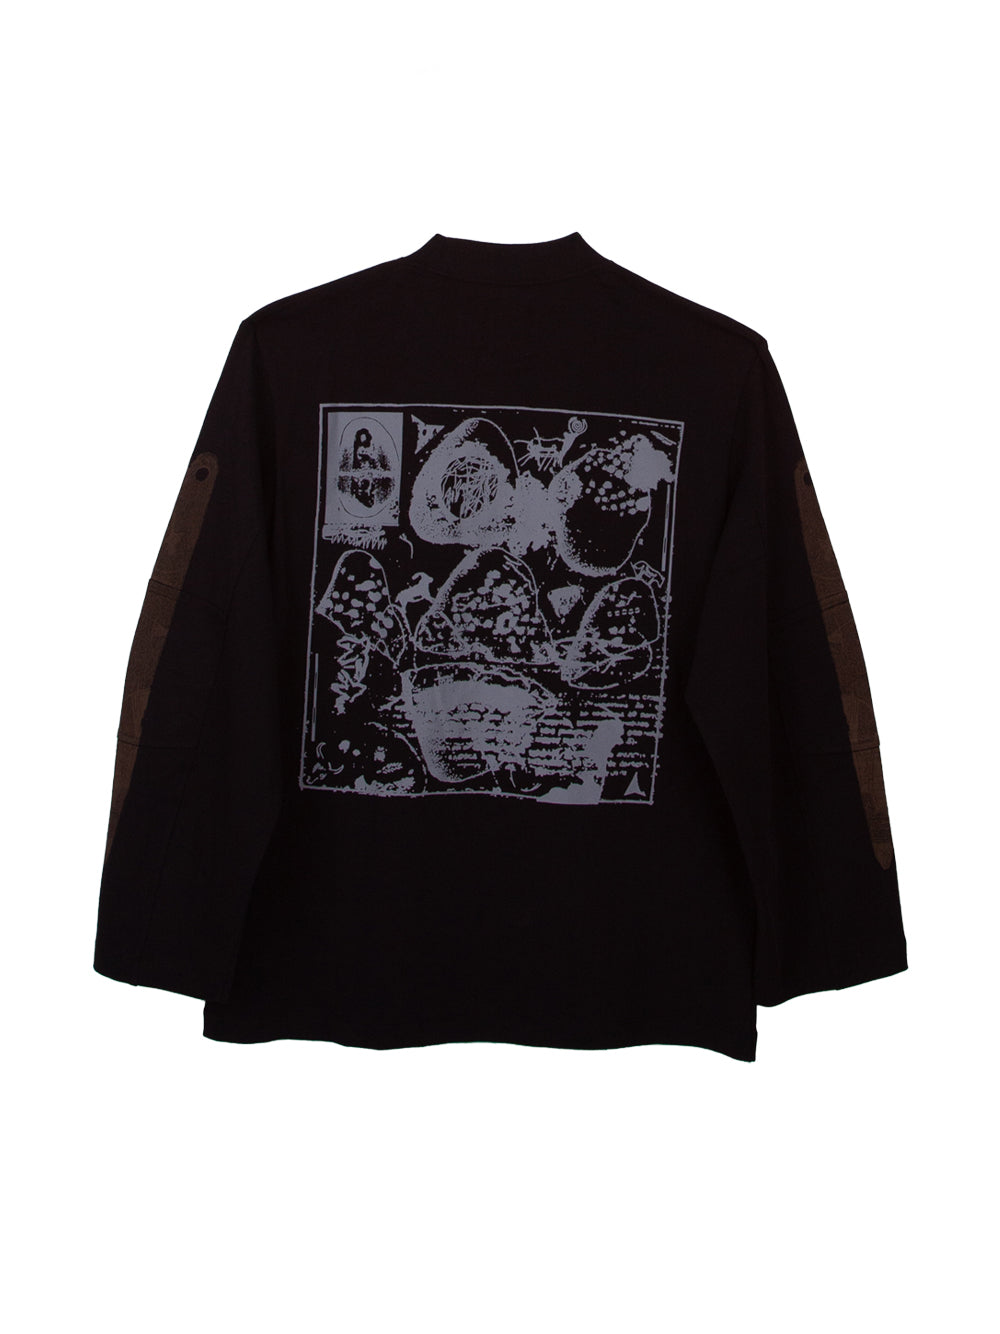 Long sleeve graphic T-Shirt